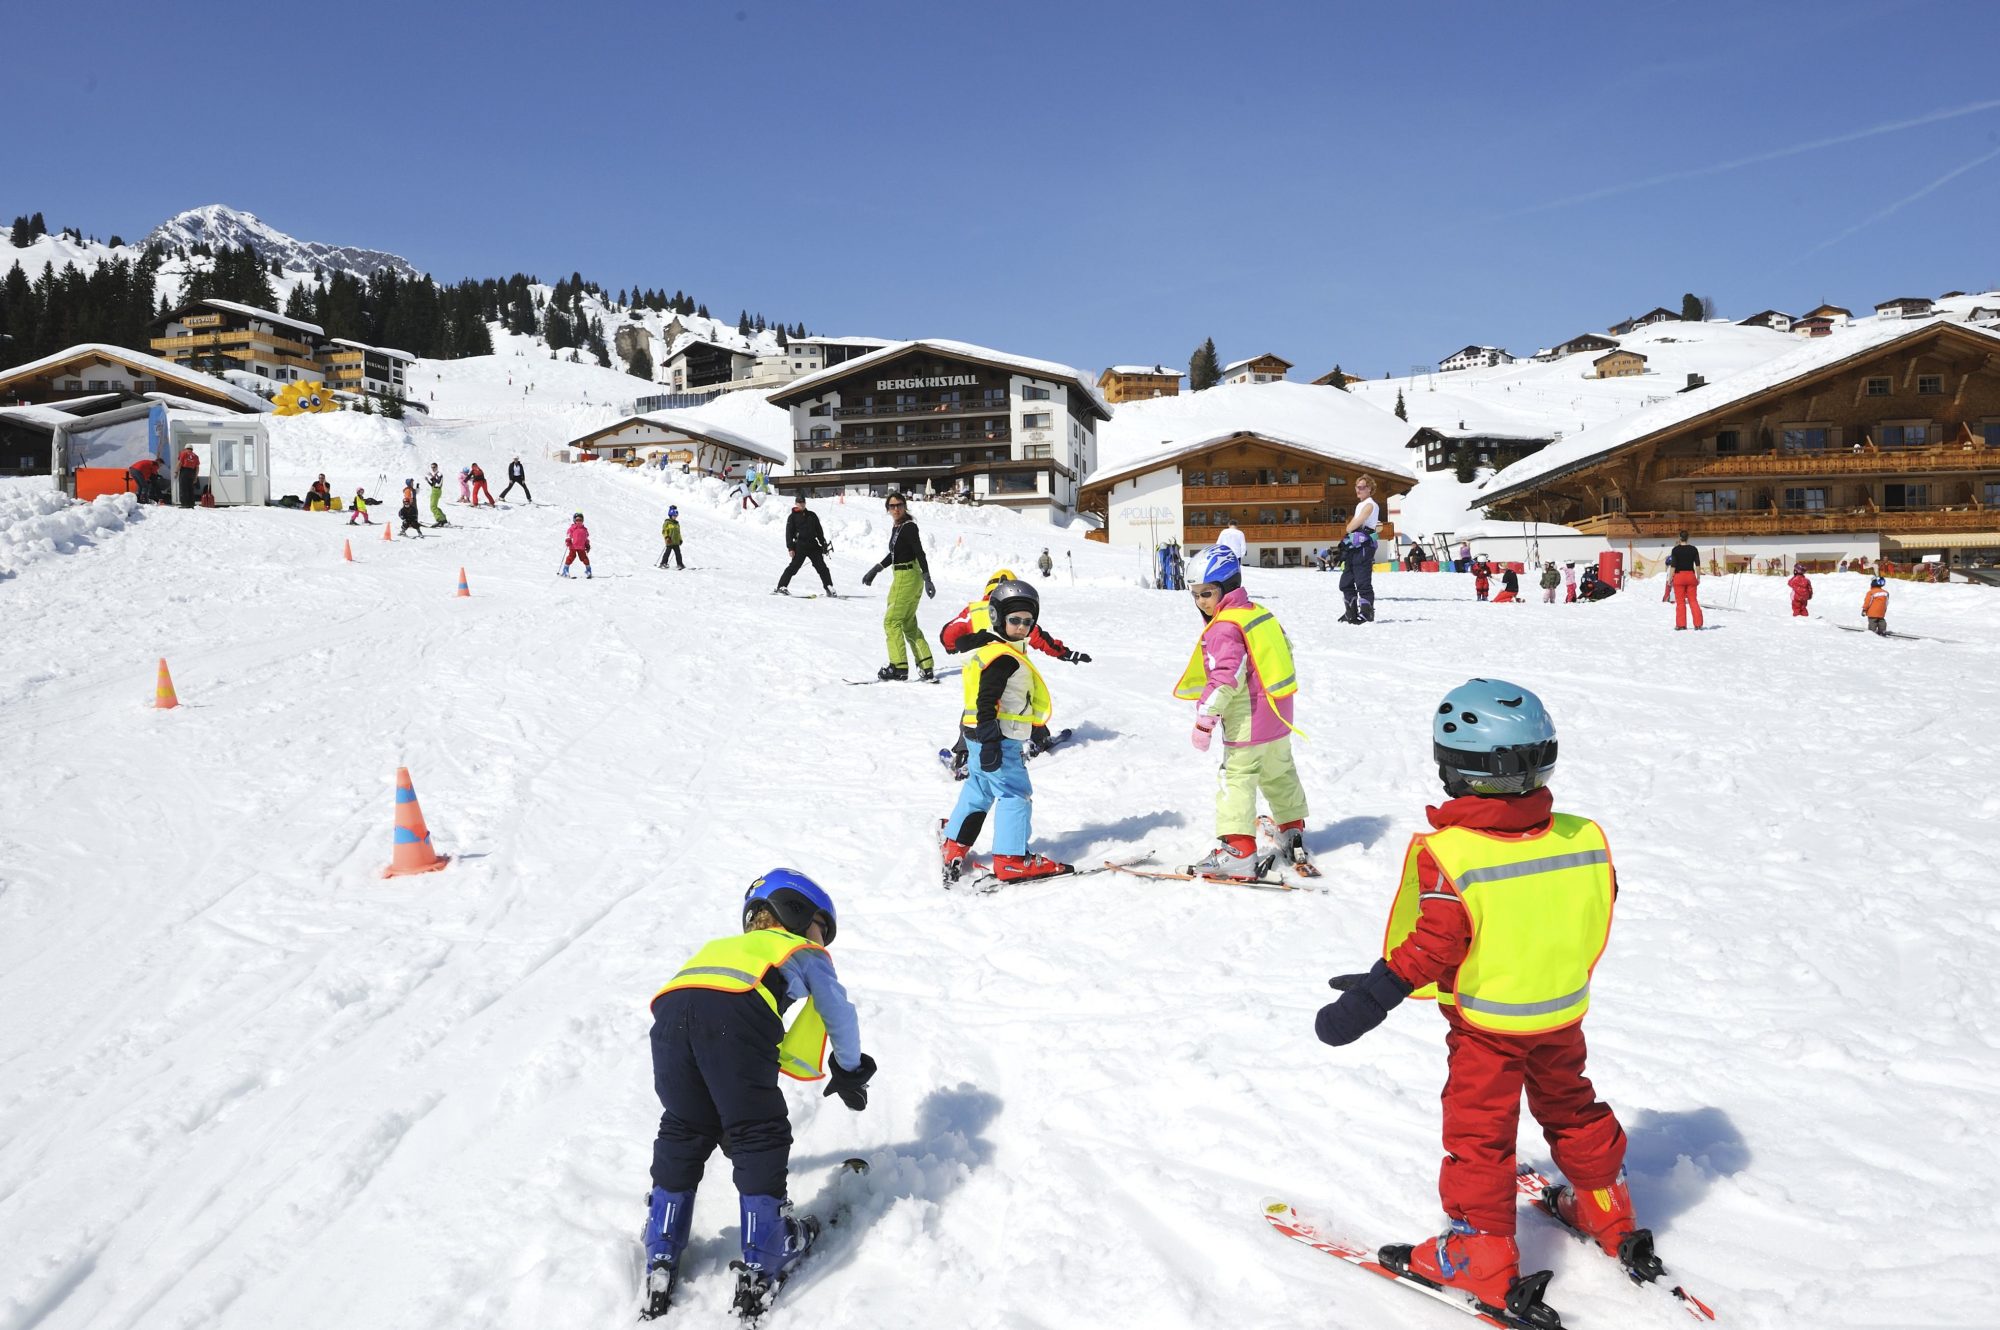 The ski school Oberlech teaching little kids how to ski. Photo by Sepp Mallaun. Lech Zürs Tourismus. The Must-Read Guide to Lech